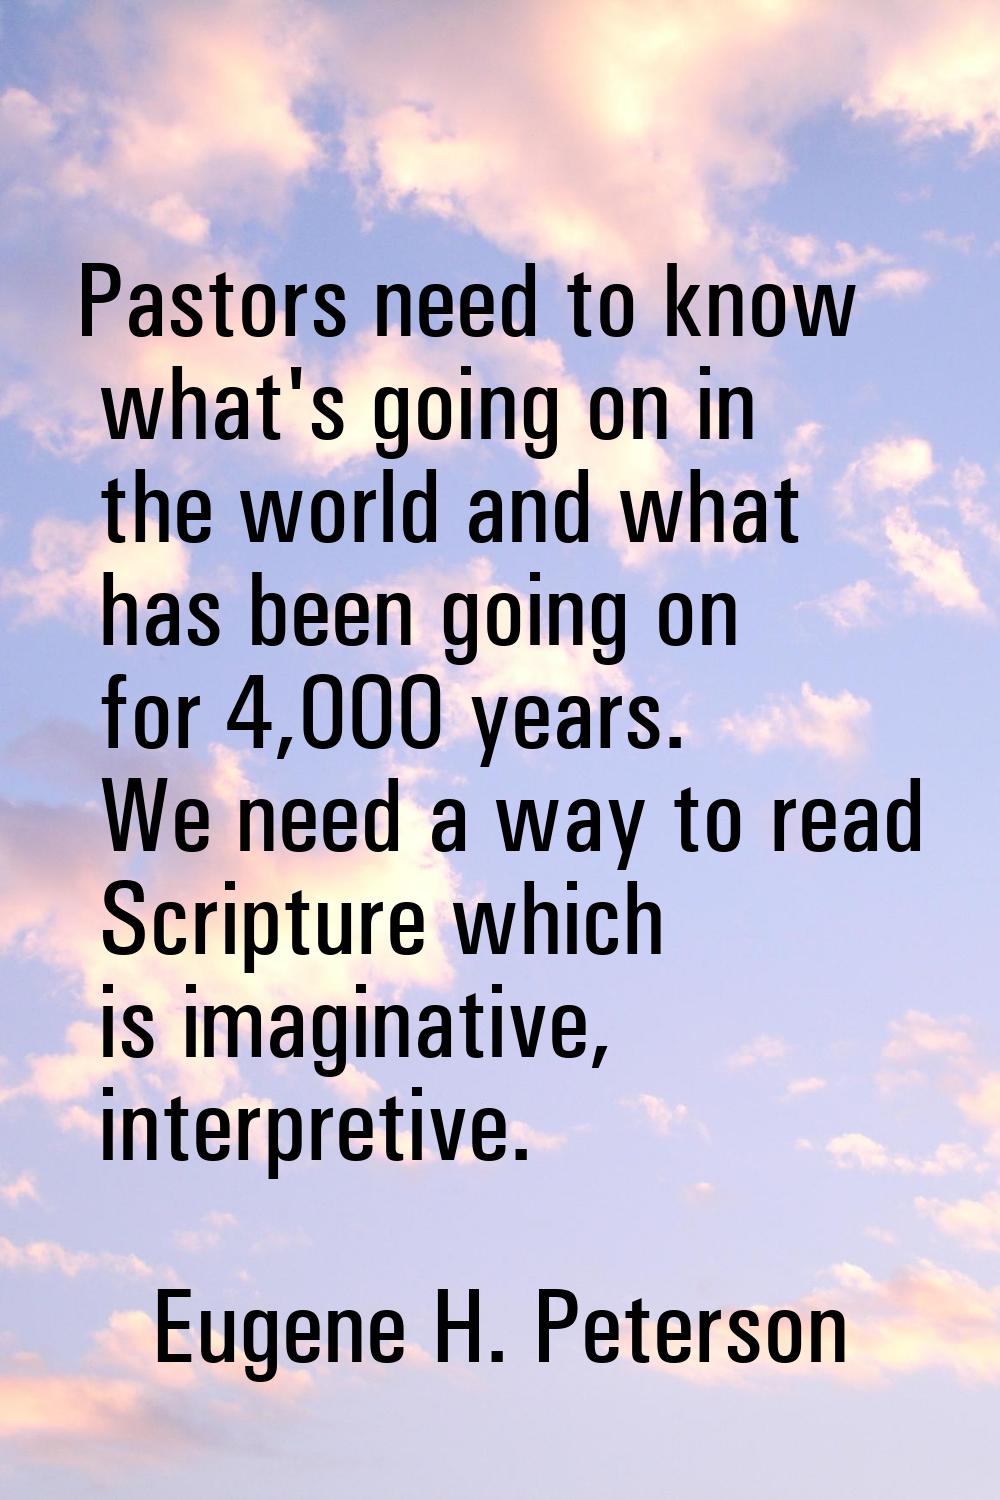 Pastors need to know what's going on in the world and what has been going on for 4,000 years. We ne